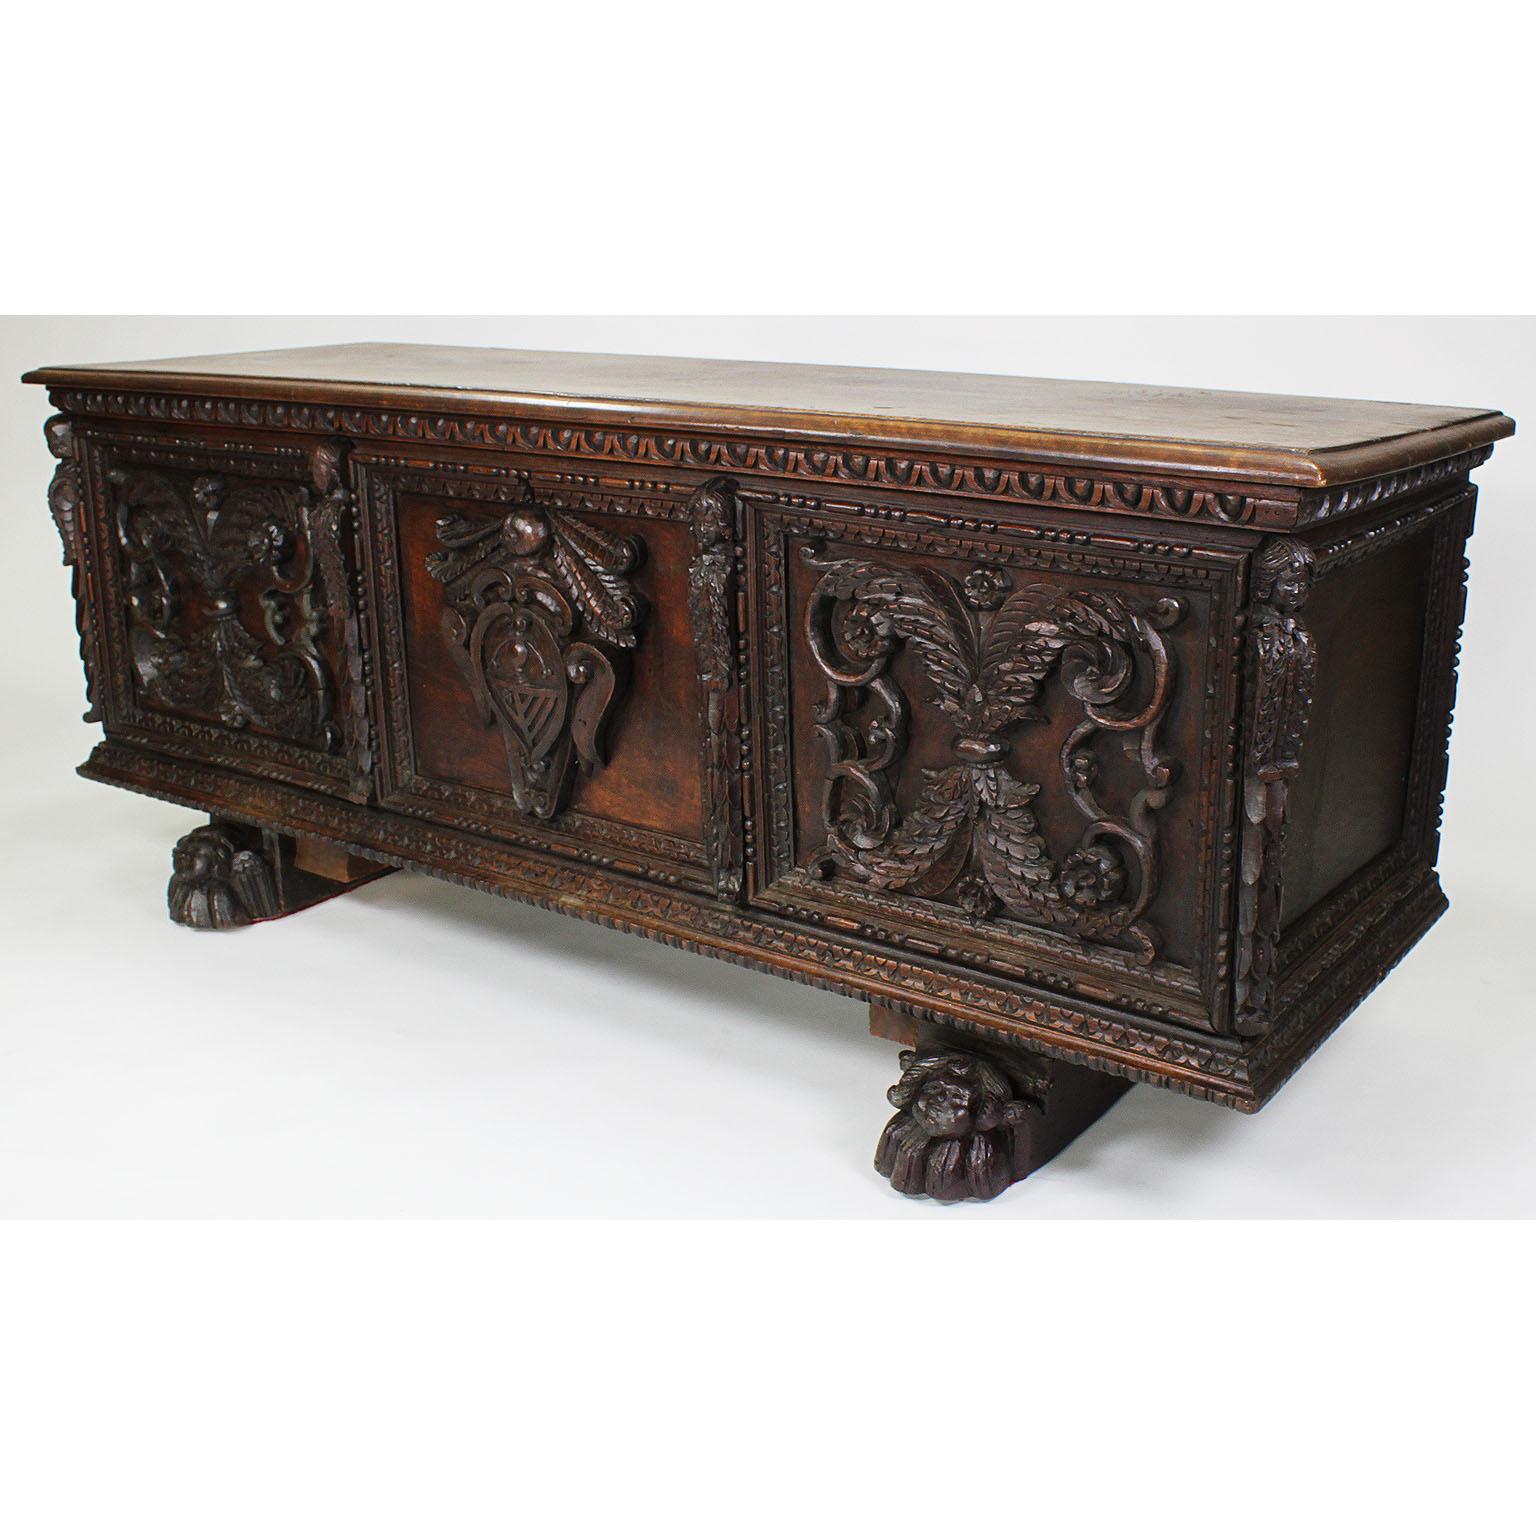 An Italian 19th century Baroque Revival style carved walnut figural Cassone chest-trunk. The ornately carved chest, also known as a marriage chest, with an opening top supported with wrought iron hinges, the front centered with a crest and